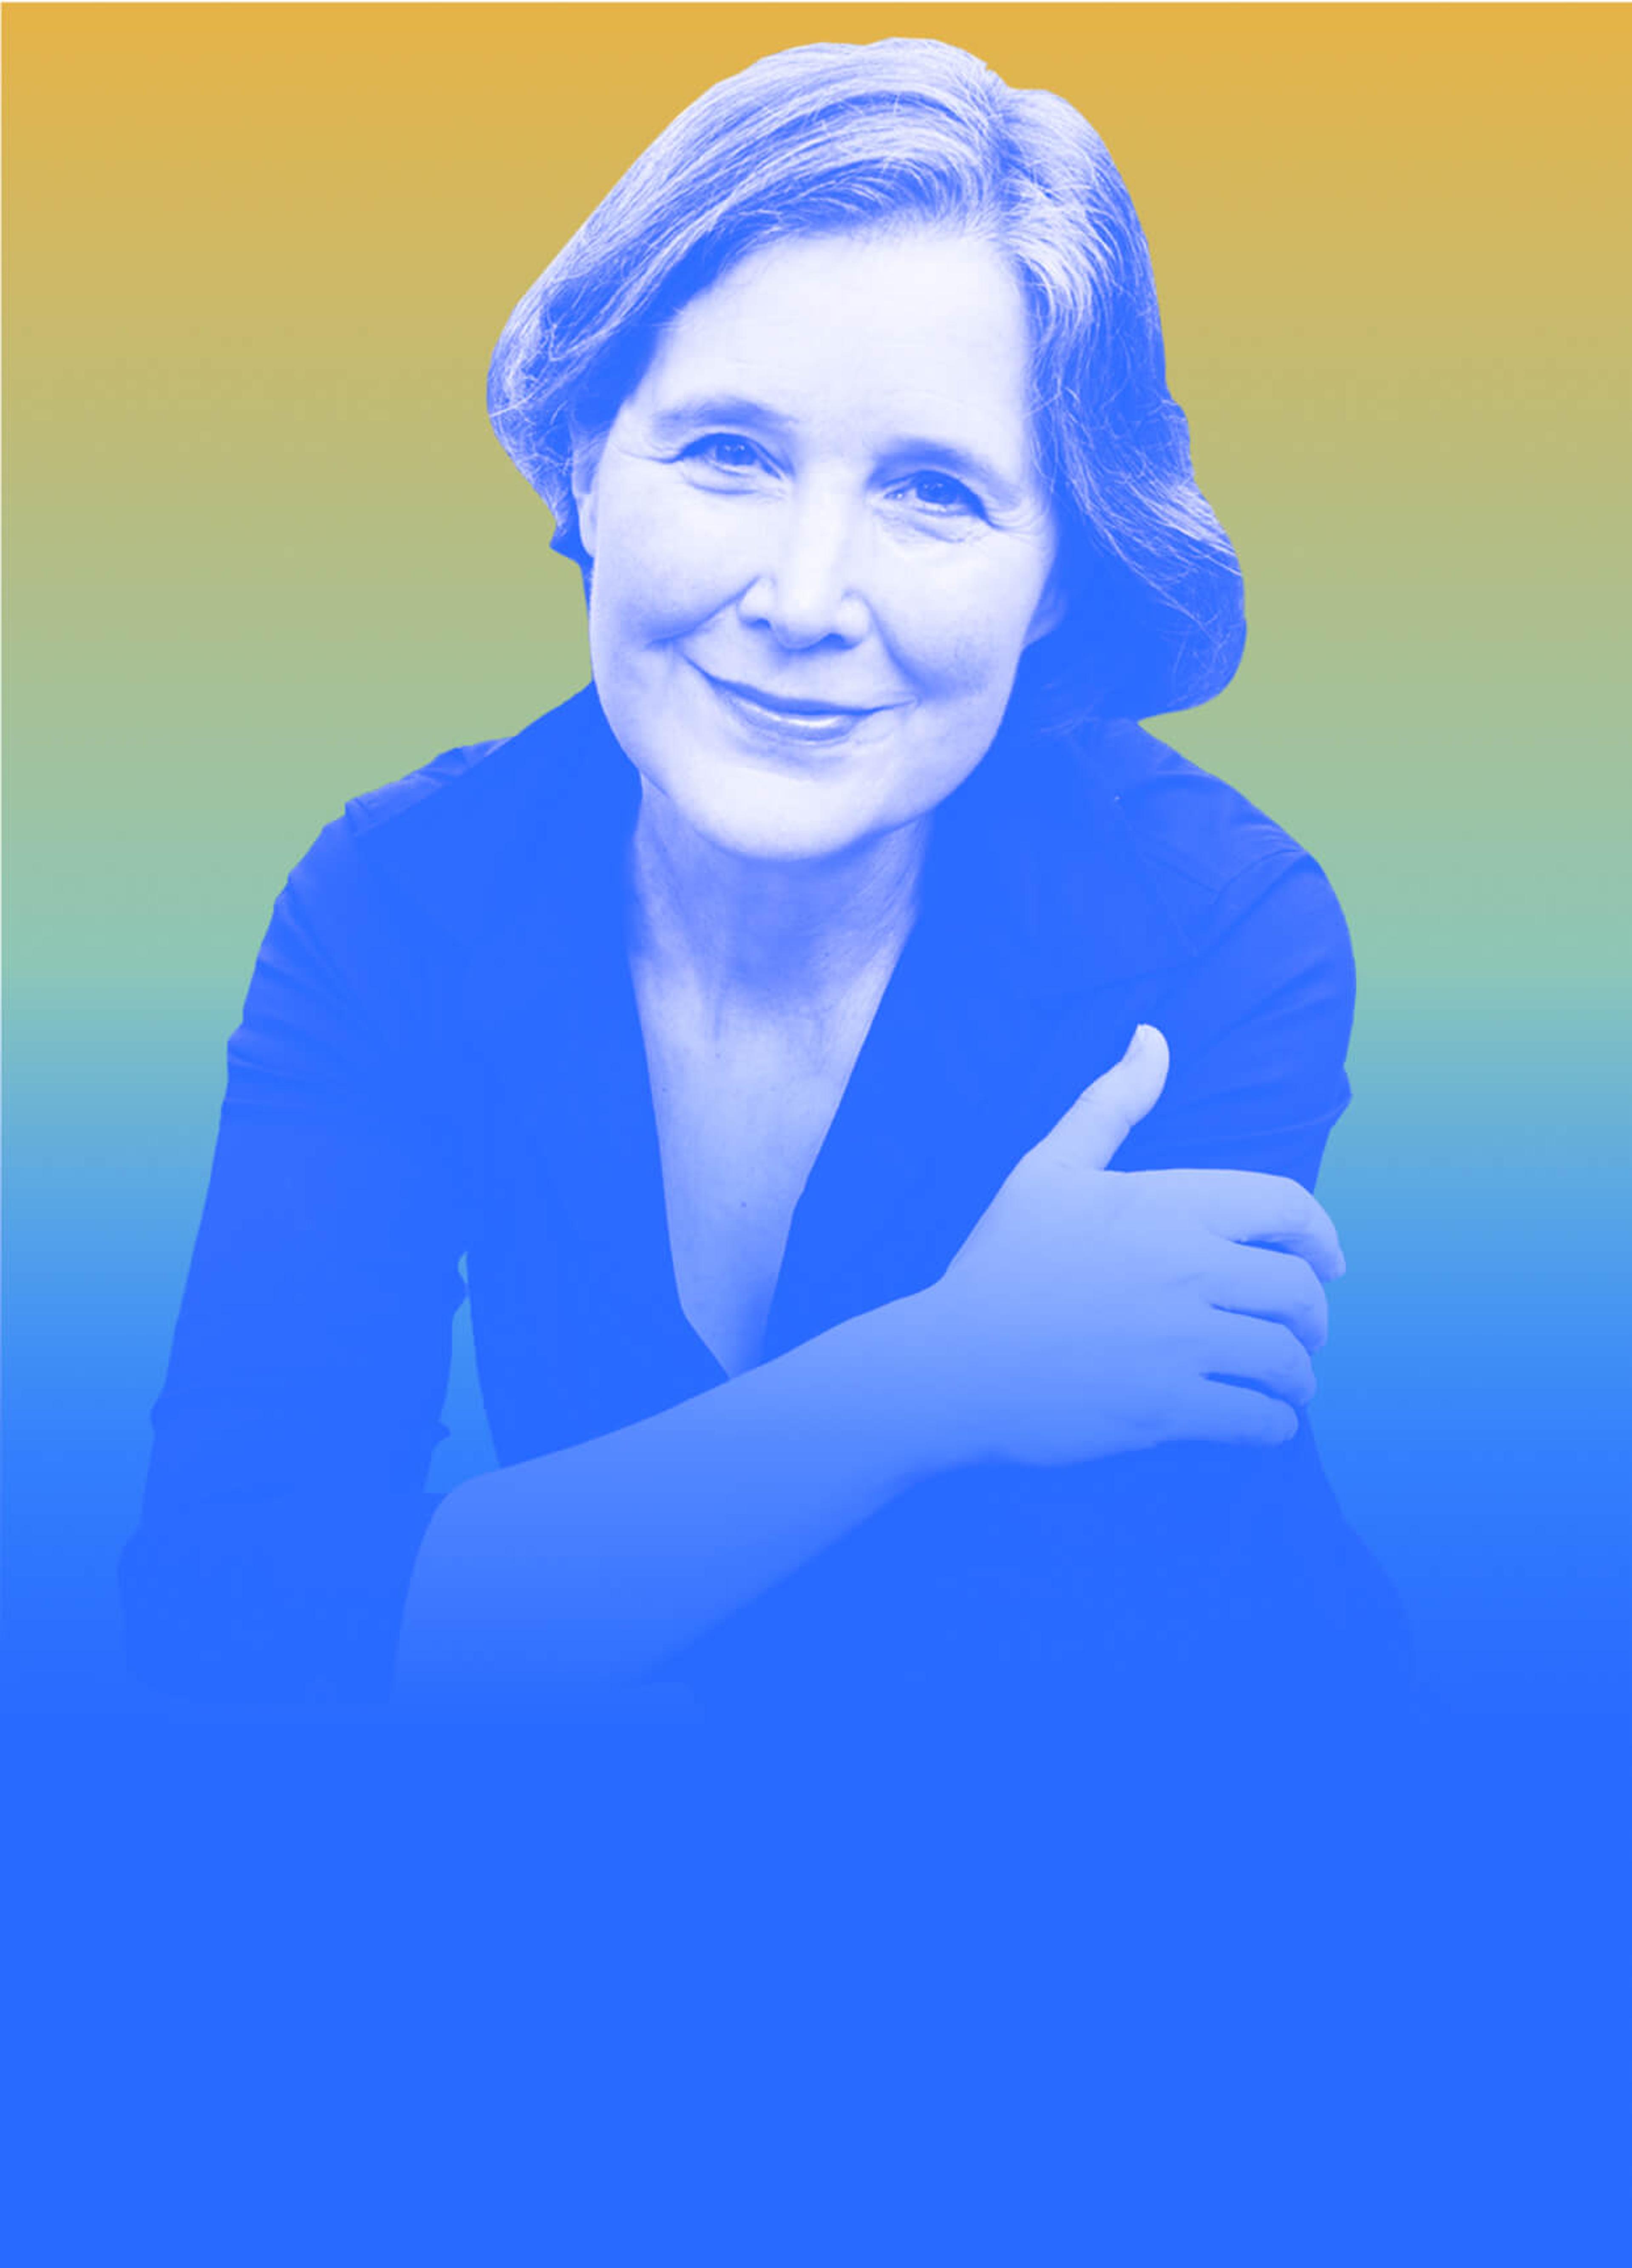 Ann Patchett on a remarkable friendship, the importance of Snoopy in her life, and much, much more.